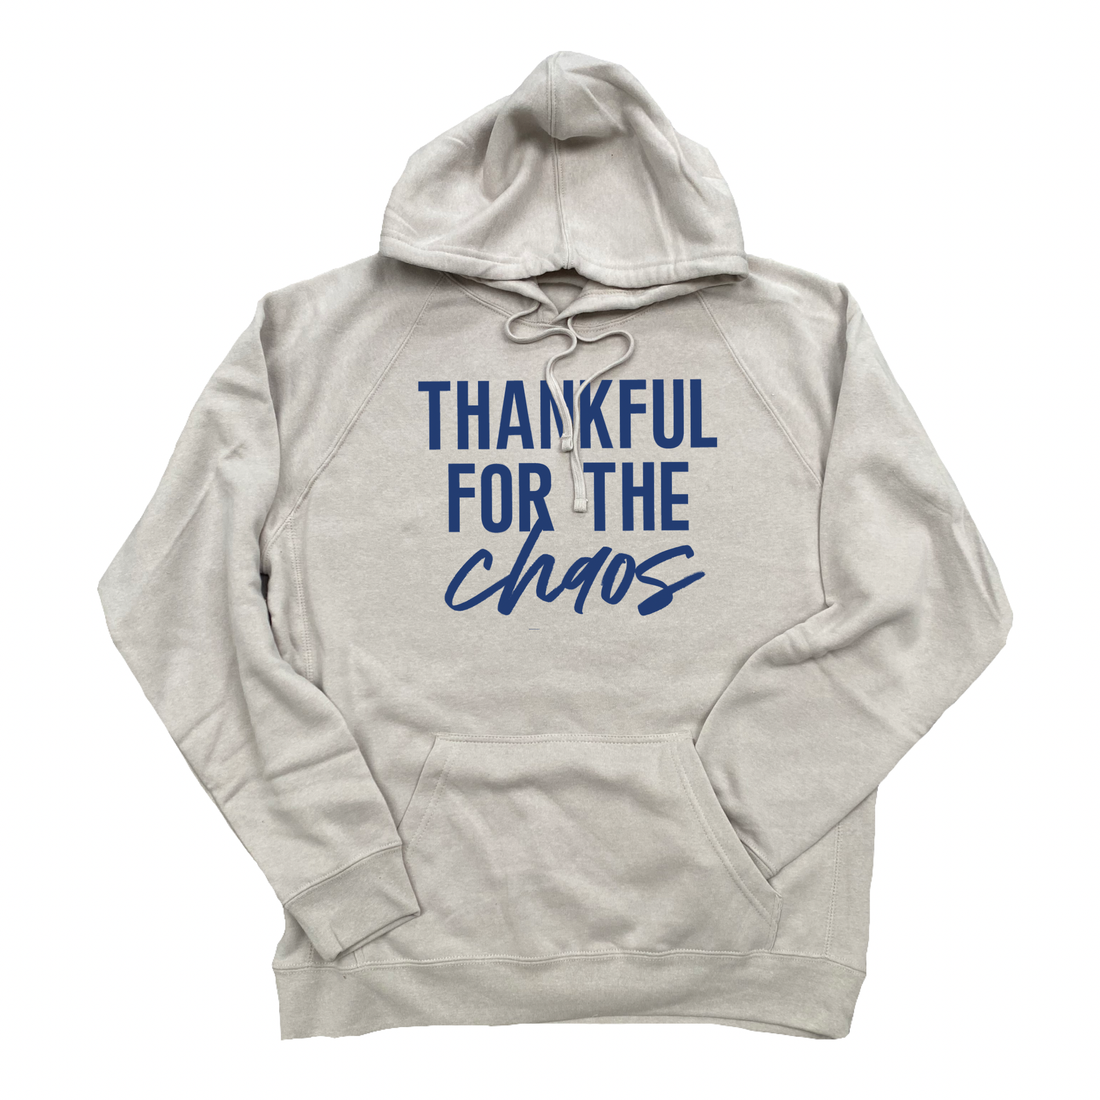 Thankful for the Chaos Unisex Hoodie (SM)